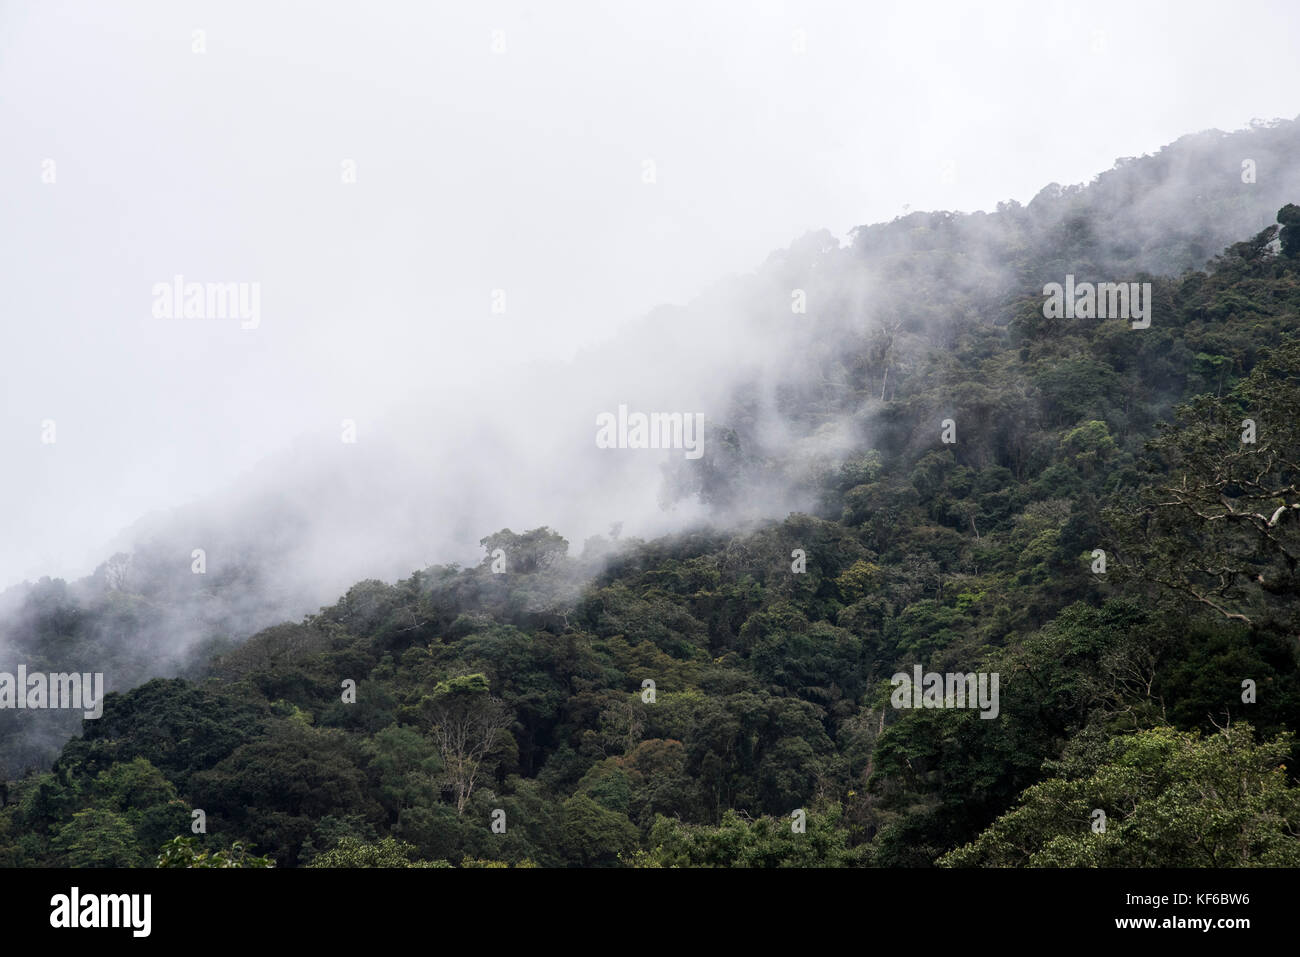 When clouds meet the mountain over a beautiful green forest in Genting highlands in Malaysia. Stock Photo